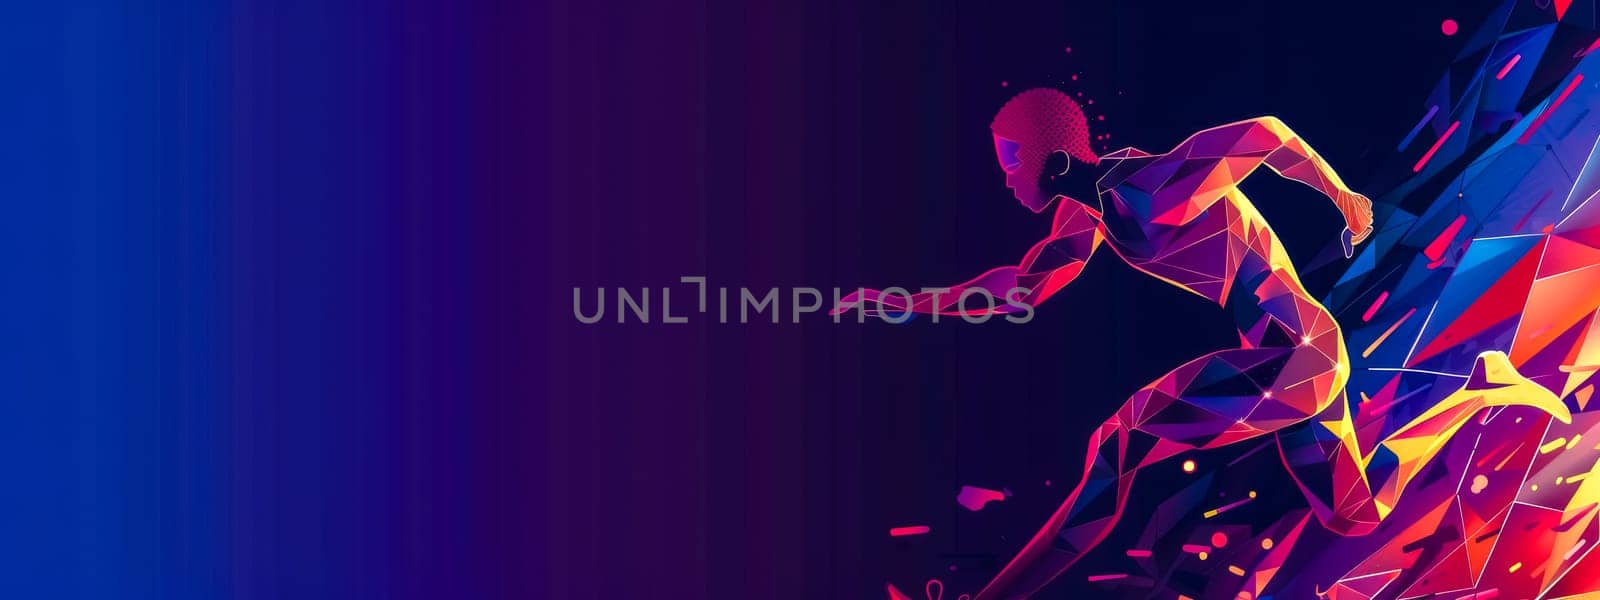 Dynamic runner - abstract illustration by Edophoto